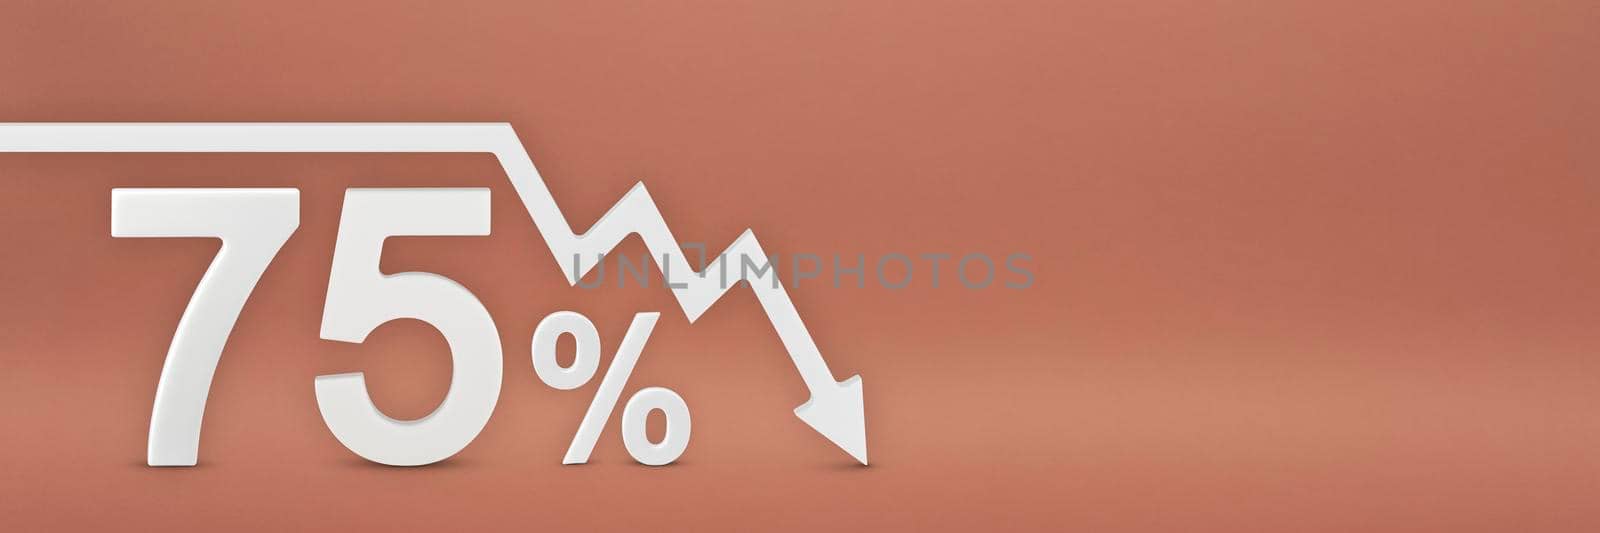 seventy-five percent, the arrow on the graph is pointing down. Stock market crash, bear market, inflation.Economic collapse, collapse of stocks.3d banner,75 percent discount sign on a red background